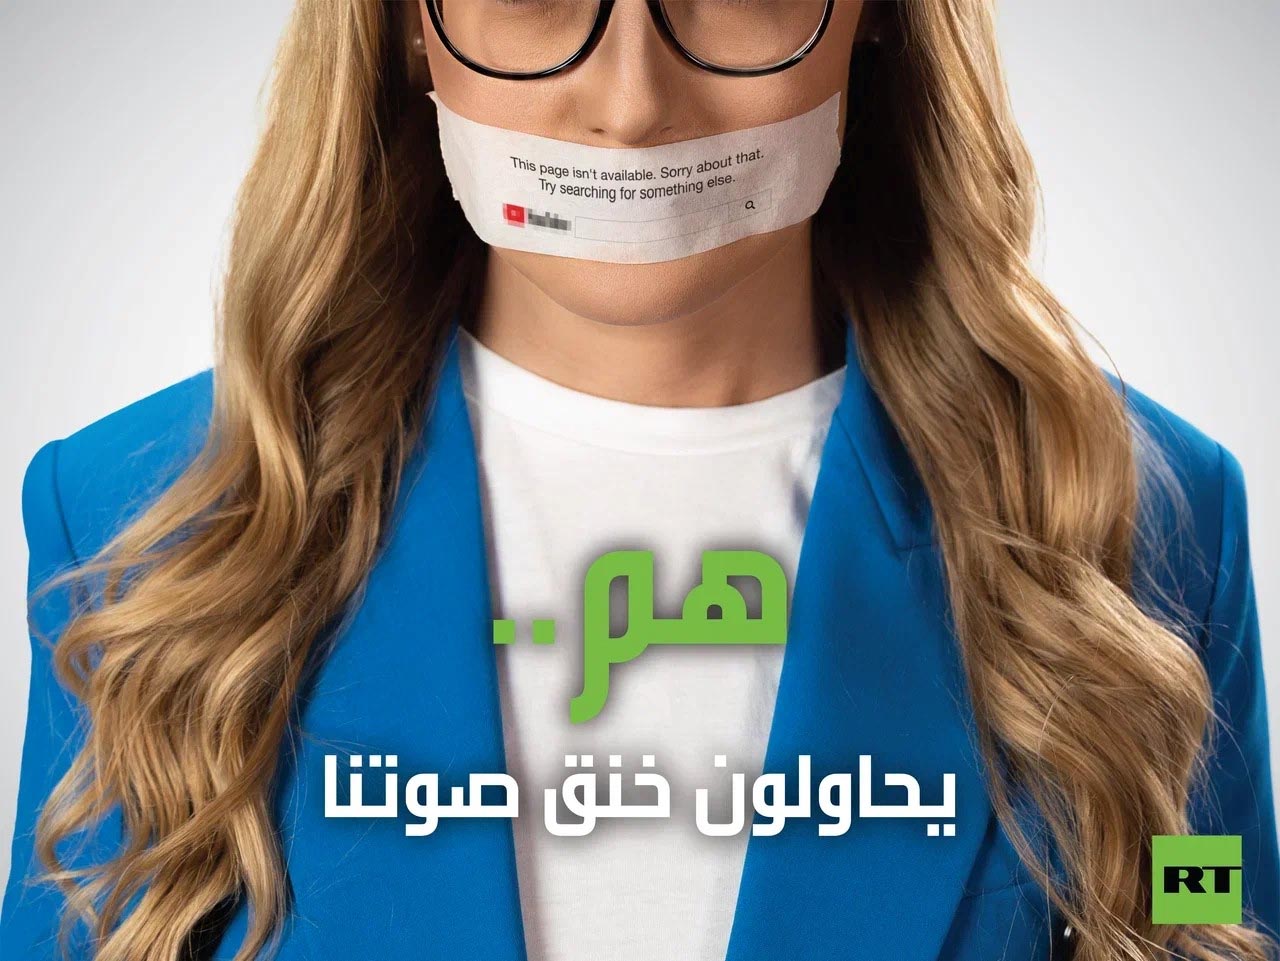 RT Arabic rolls out a wide campaign calling on audiences to seek out the truth in news